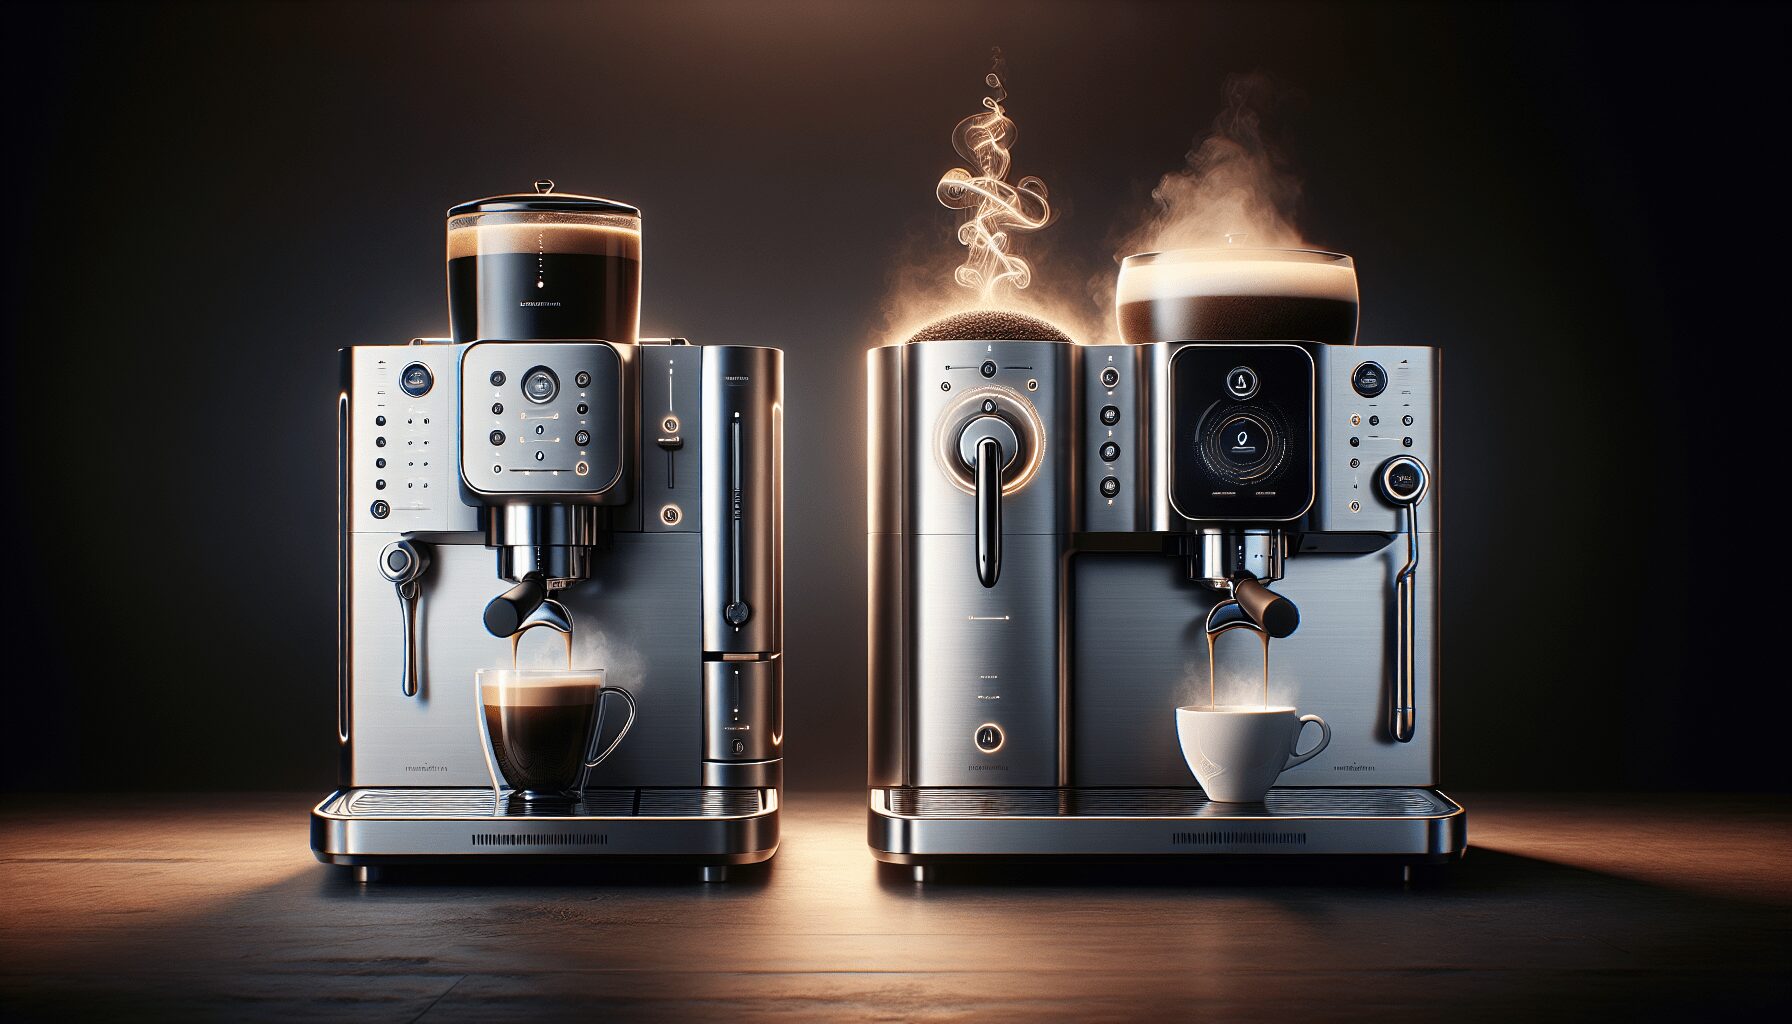 Comparing the Vertuo and VertuoPlus Coffee Machines